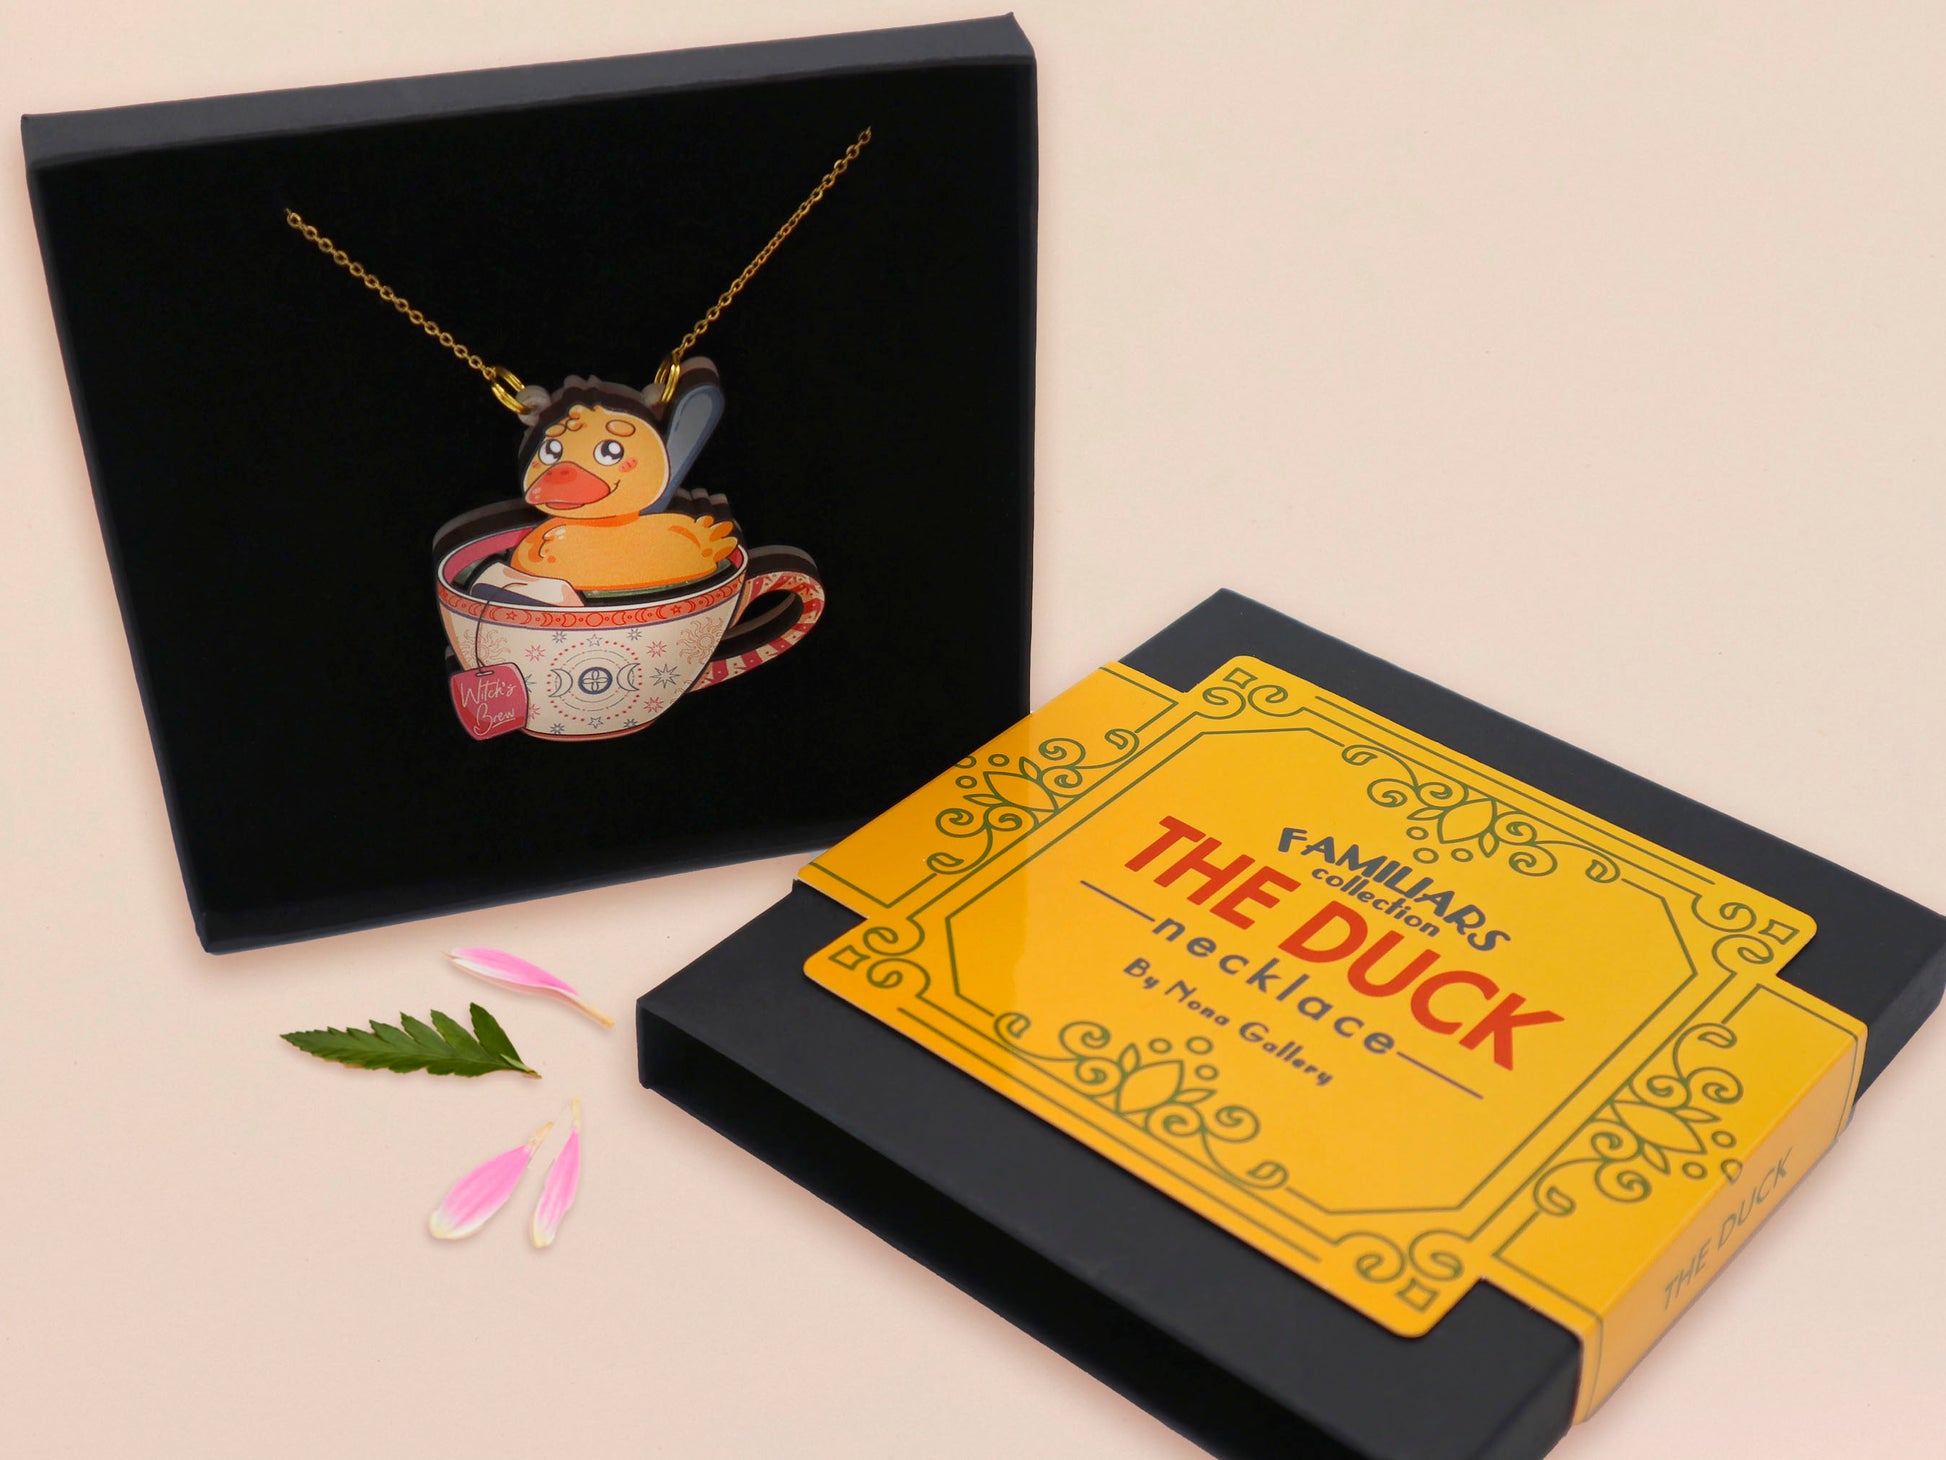 Mixed material handmade necklace of chibi cartoon duck sat in a pearlescent witch's brew teacup, with a gold chain and black gift box with a yellow familiars collection gift sleeve